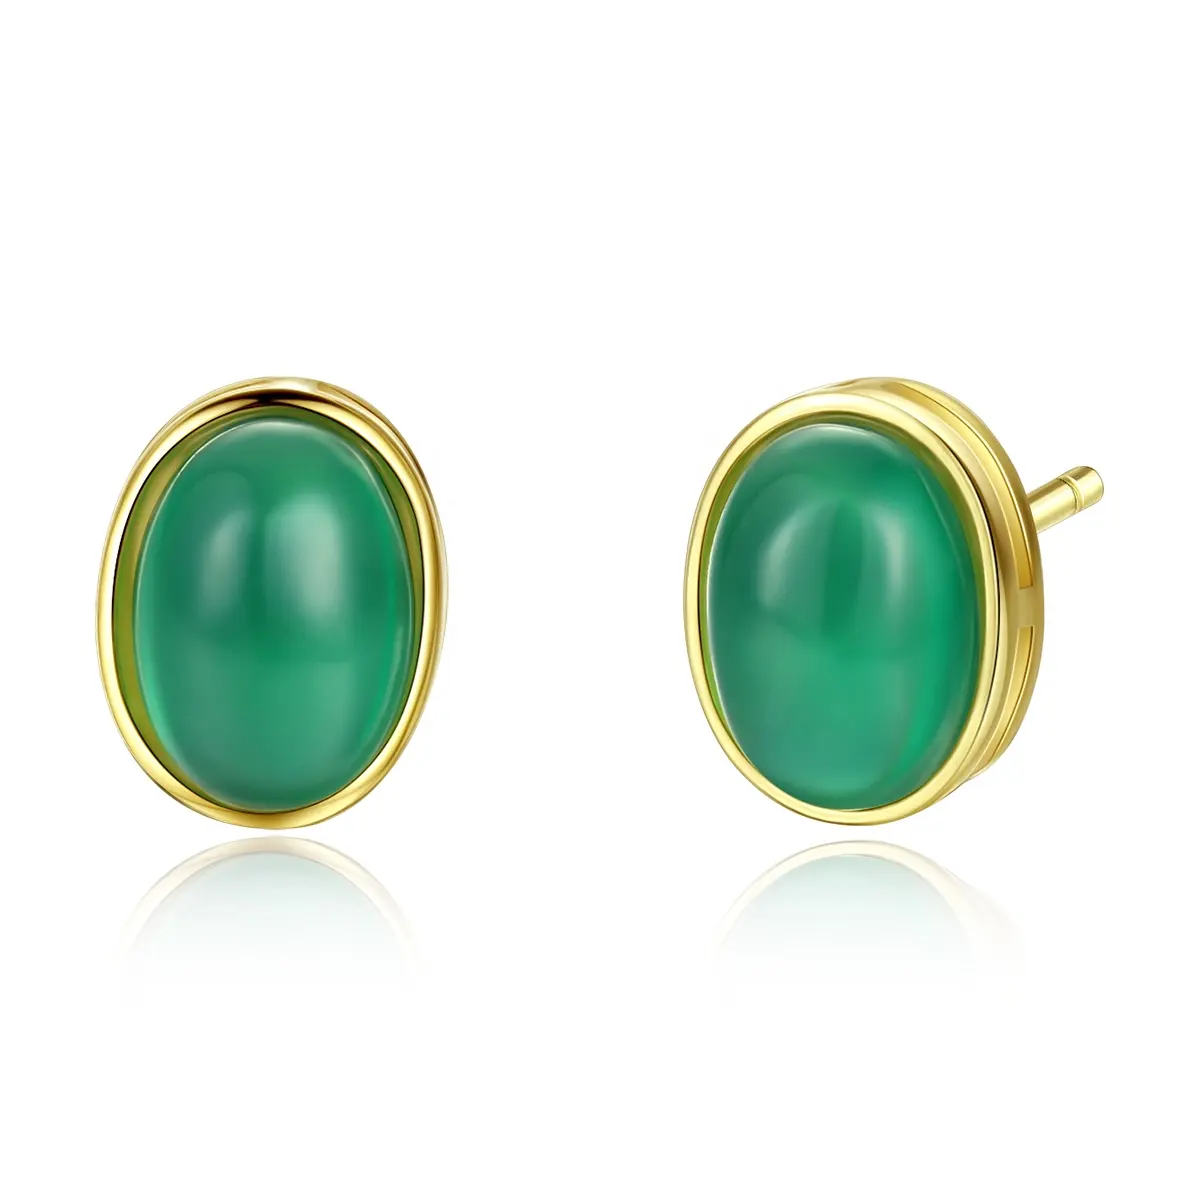 CZCITY Wholesale Gold Plated Fine Jewelry Green Color Oval Shaped Women 925 Sterling Silver Crystal Stud Earrings